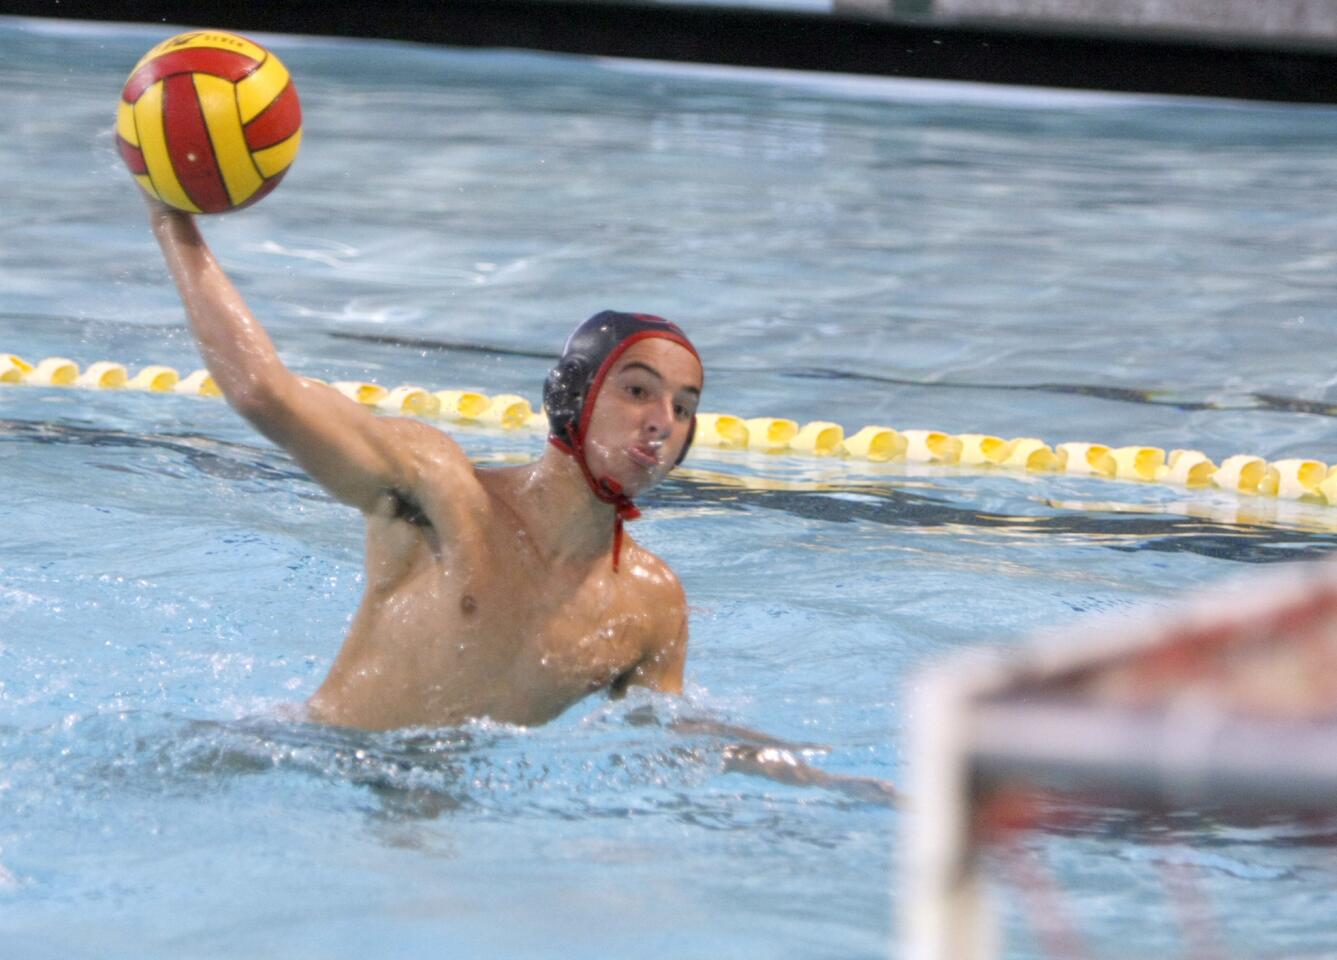 Burroughs High School water player #7 David Arakelyan scores a goal during first-round CIF SS Div. 5 game vs. Whittier High School at home in Burbank on Tuesday, Nov. 8, 2016.